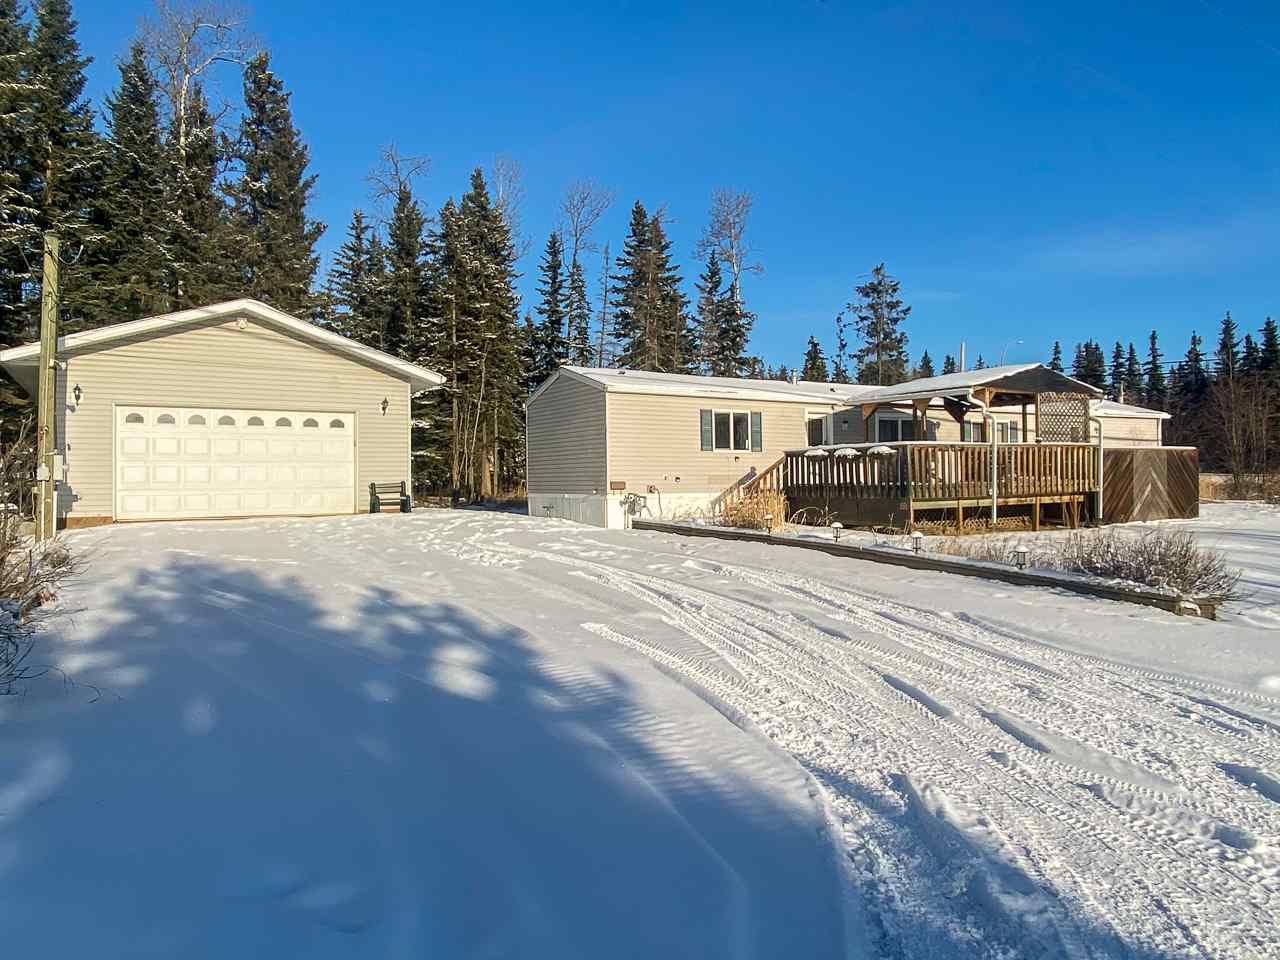 Main Photo: 12924 WEST BYPASS Road in Fort St. John: Fort St. John - Rural W 100th Manufactured Home for sale (Fort St. John (Zone 60))  : MLS®# R2517371